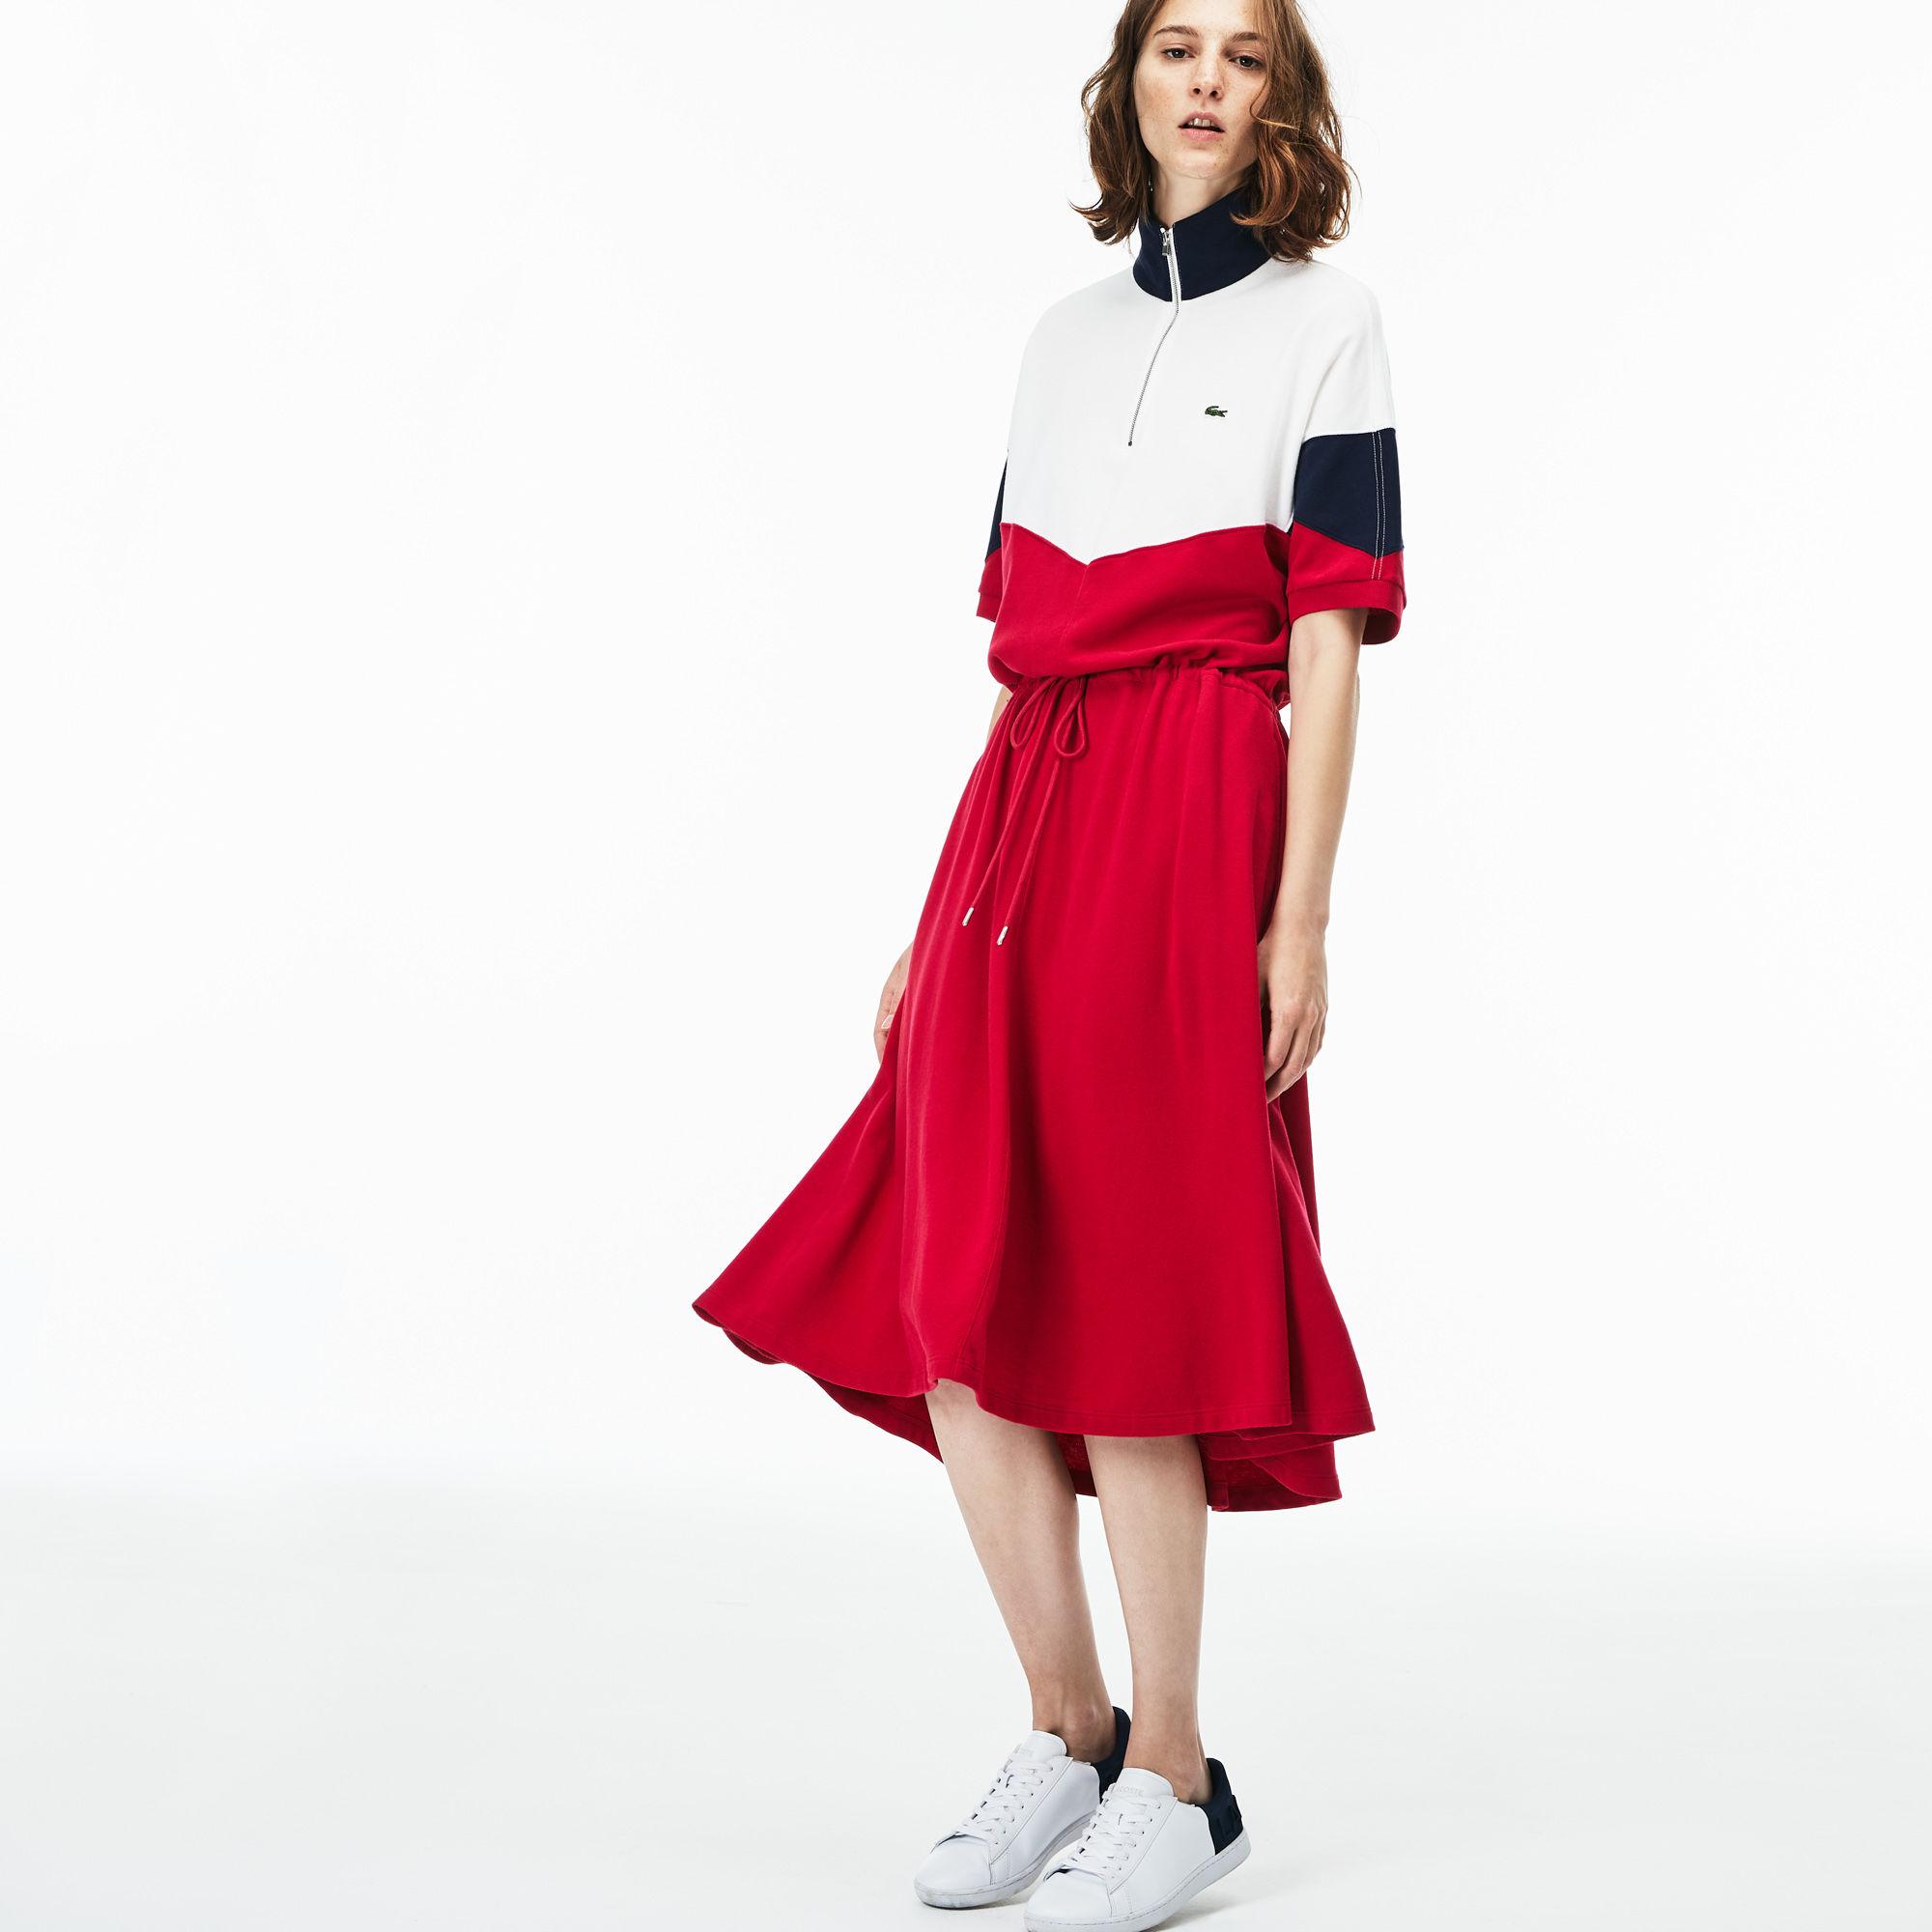 Lacoste Dress Red Top Sellers, 53% OFF | www.ingeniovirtual.com